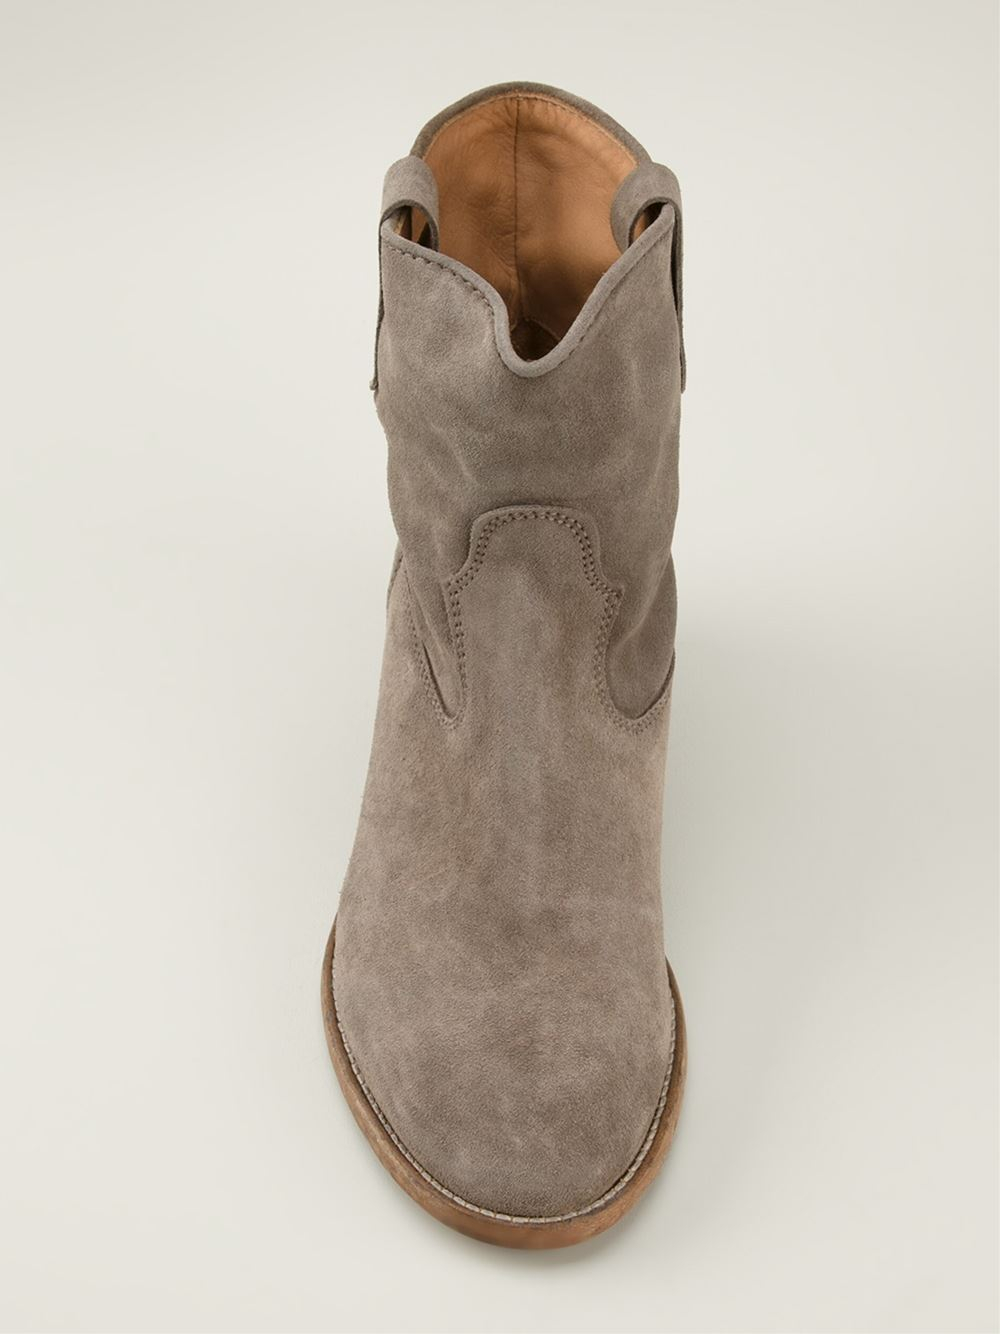 Isabel Marant 'Crisi' Boots in Grey (Gray) - Lyst